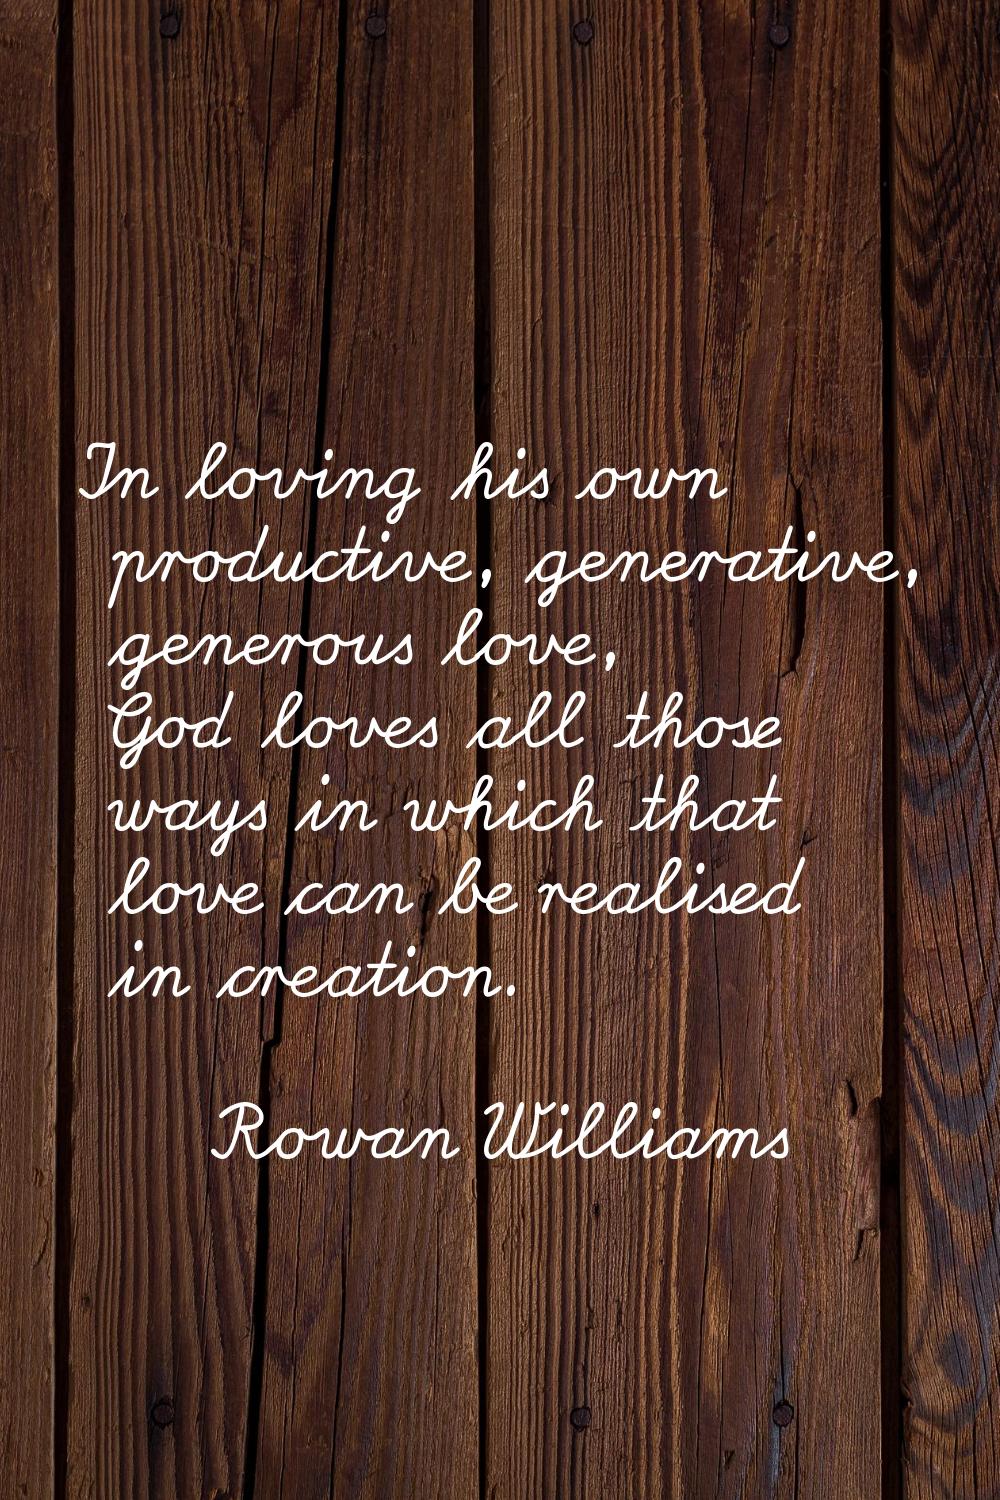 In loving his own productive, generative, generous love, God loves all those ways in which that lov